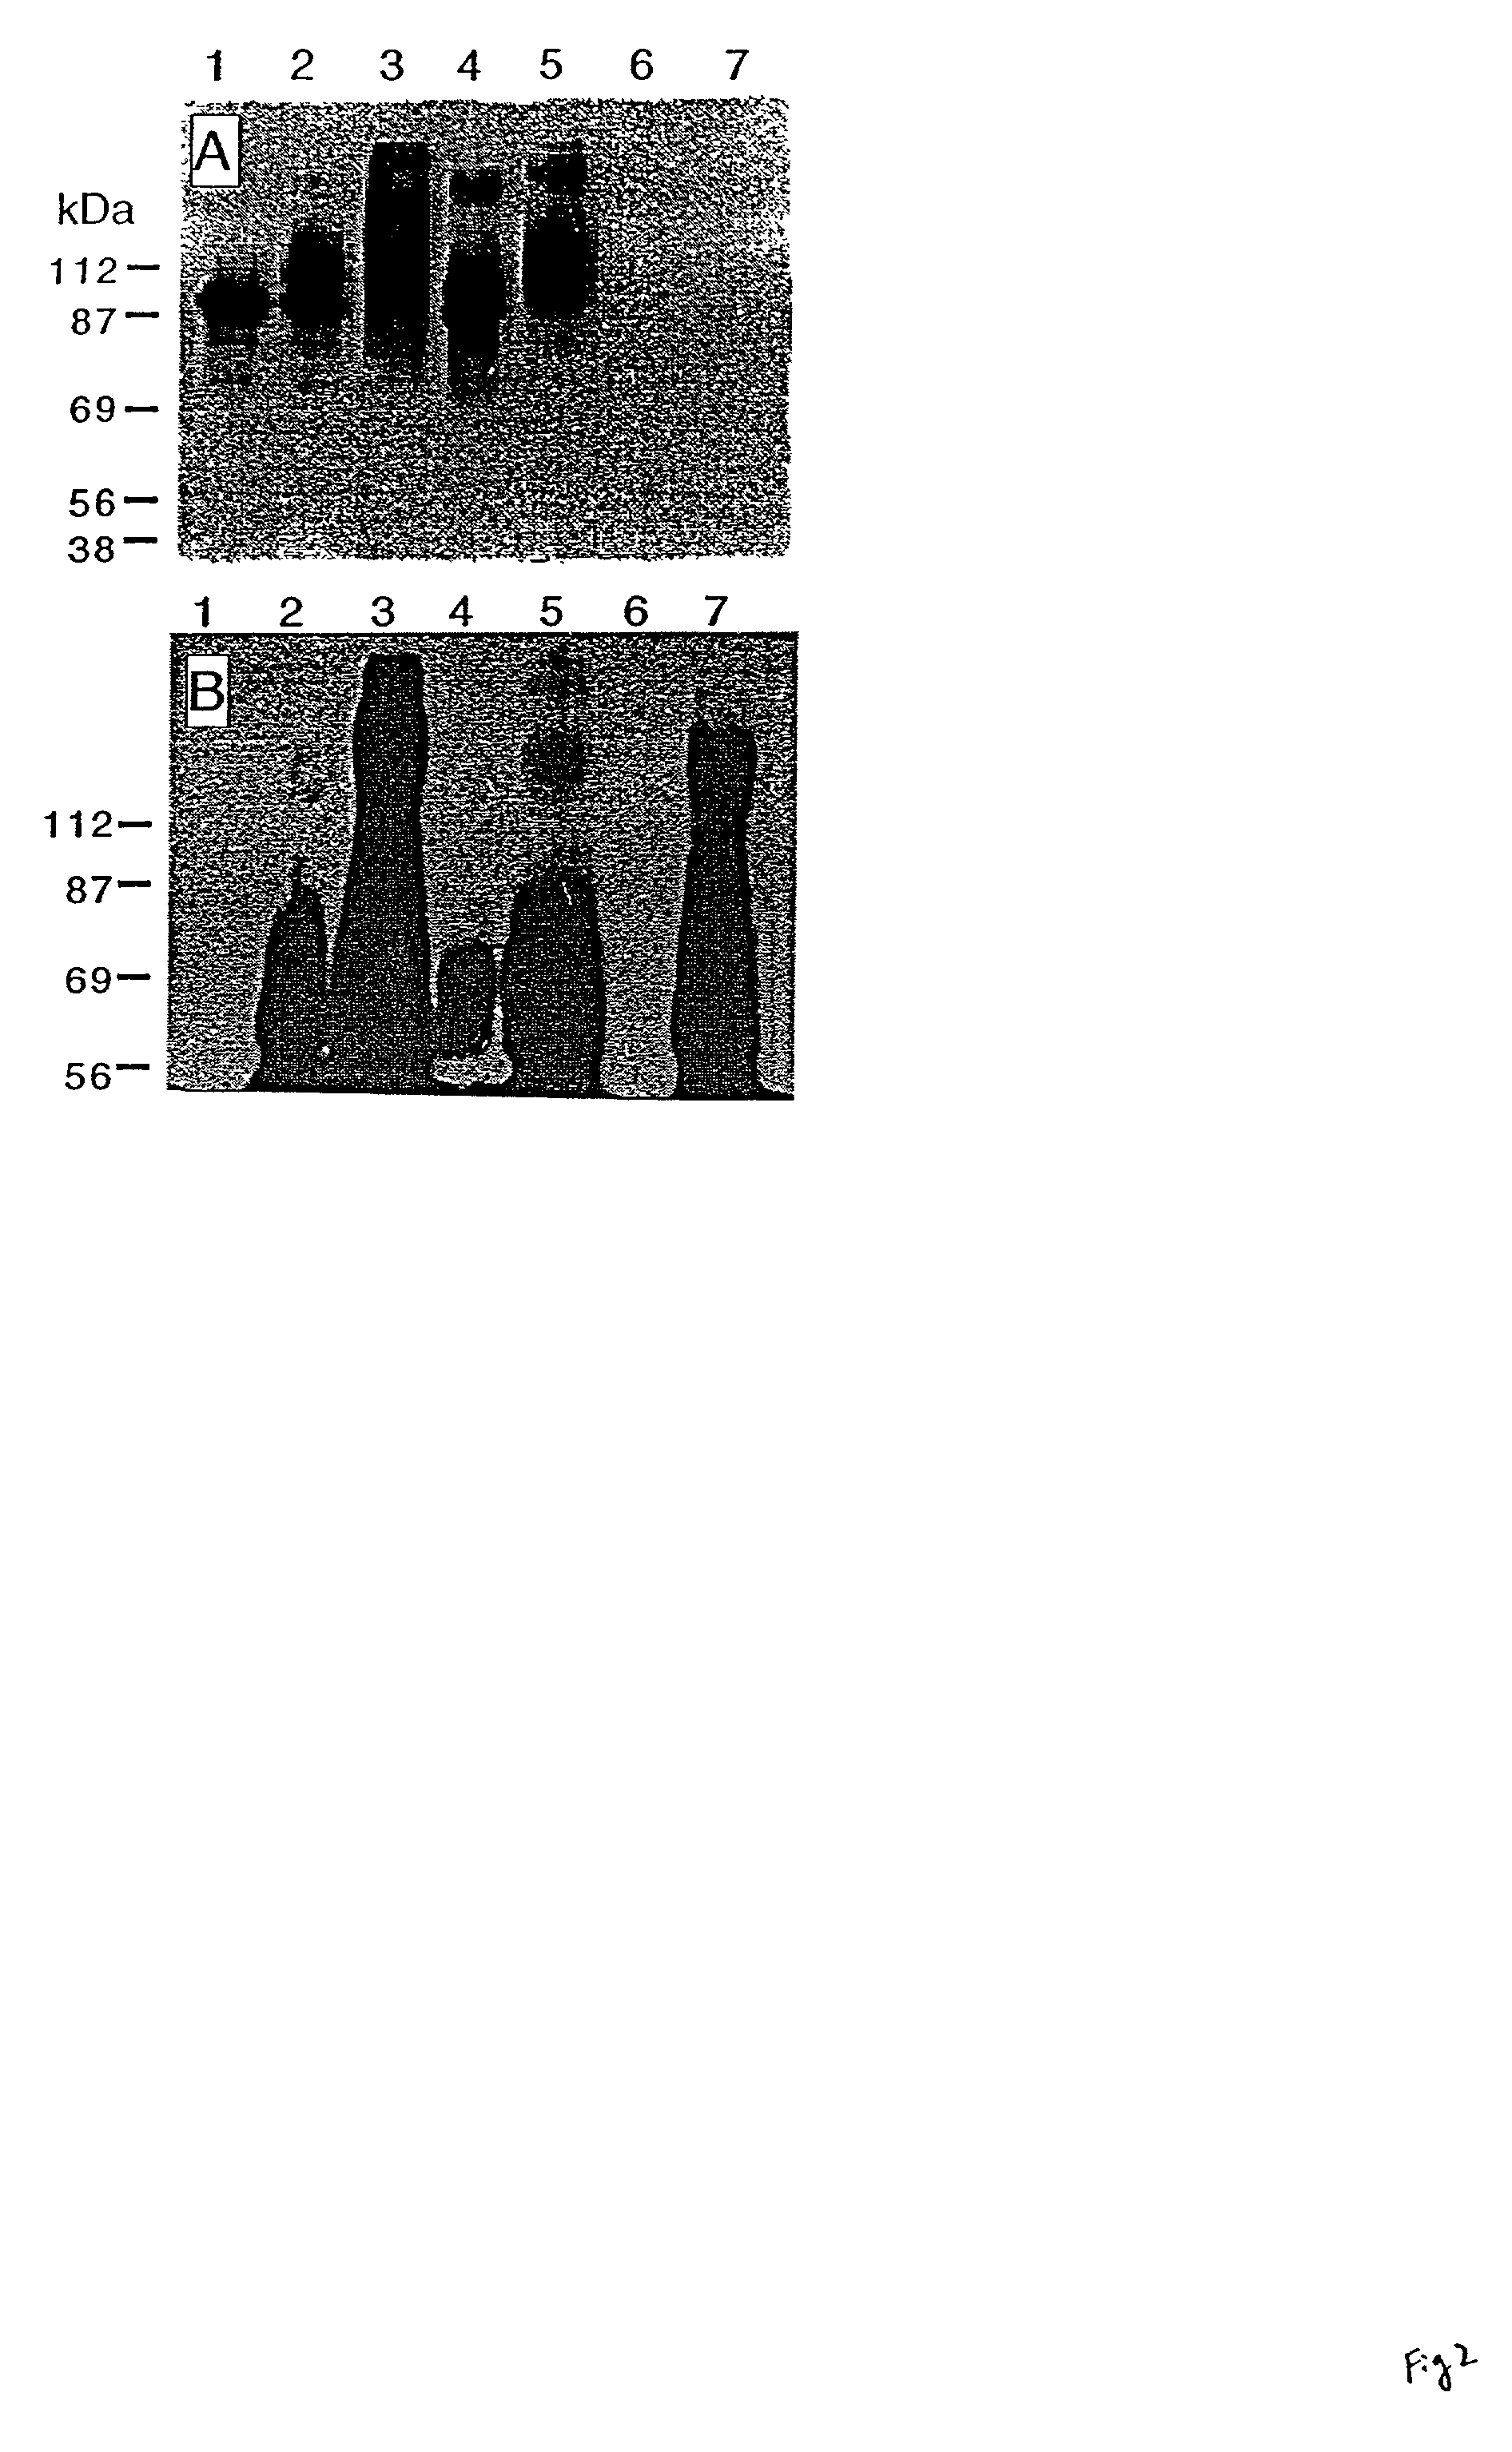 Monoclonal antibody for analysis and clearance of polyethylene glycol and polyethylene glycol-modified molecules